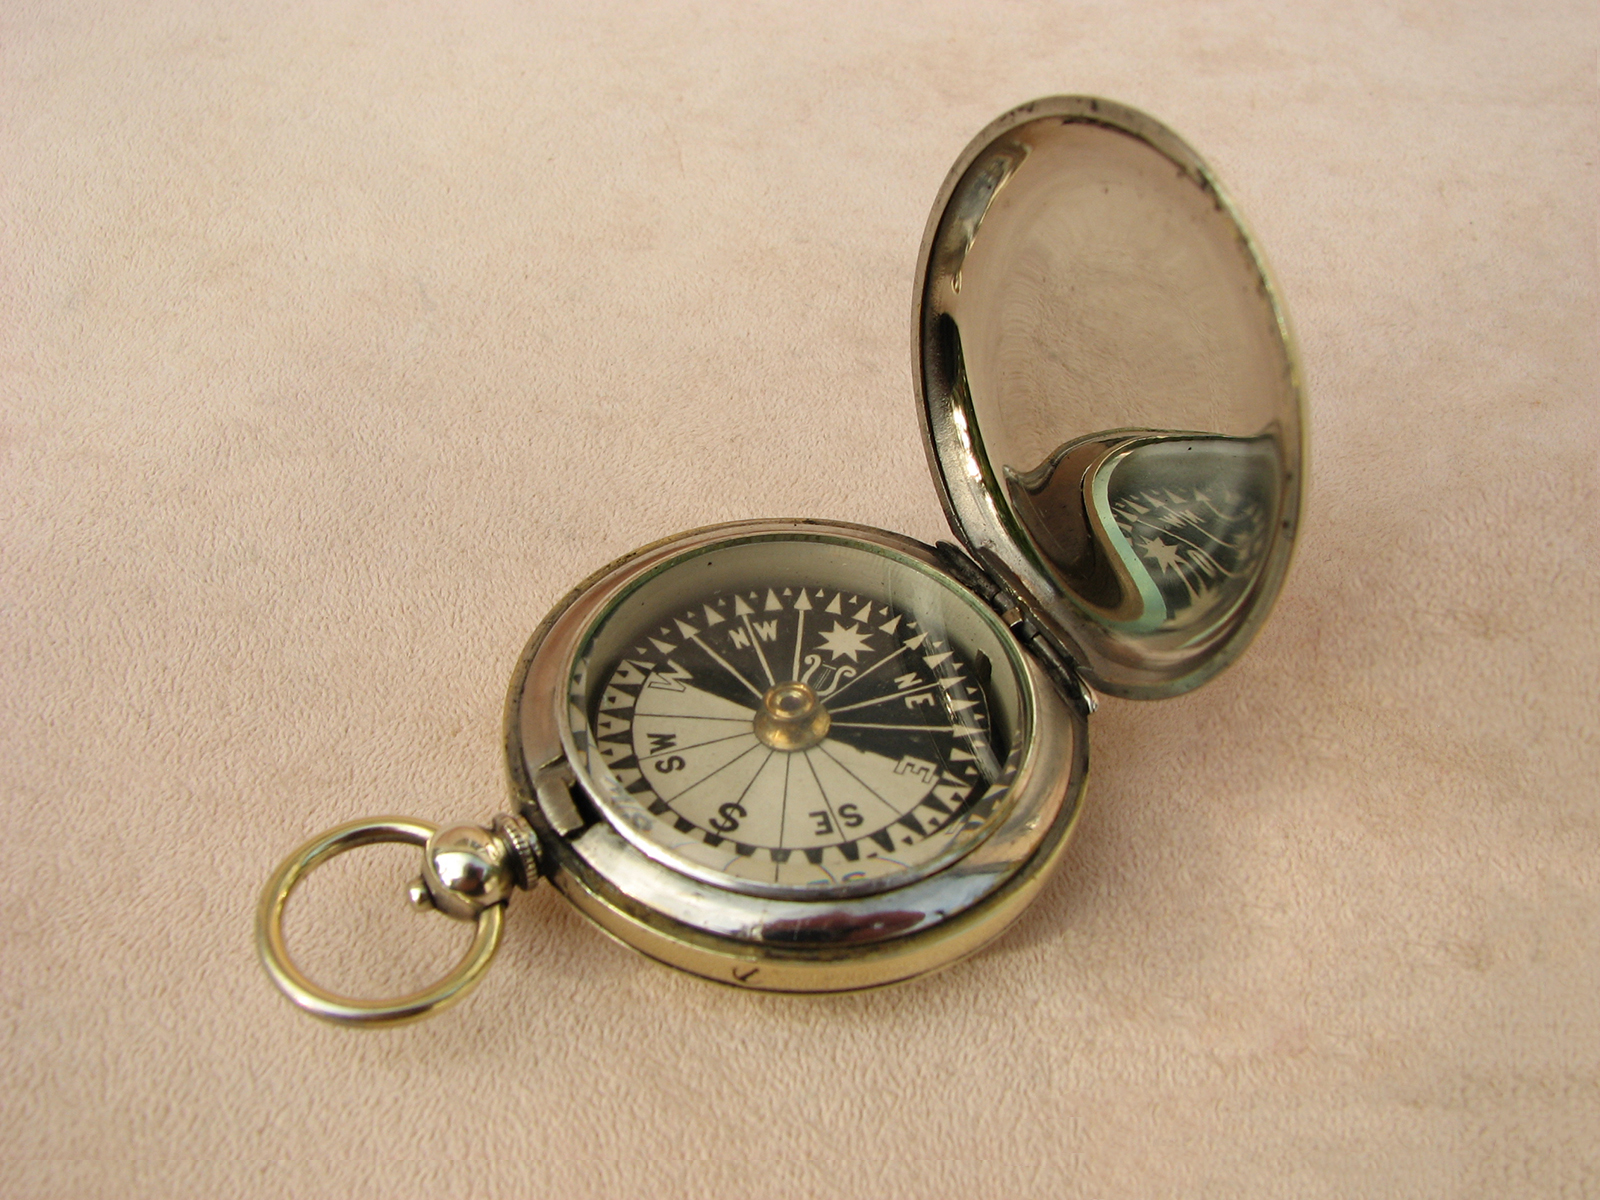 WW1 era pocket compass with Singers patent style dial